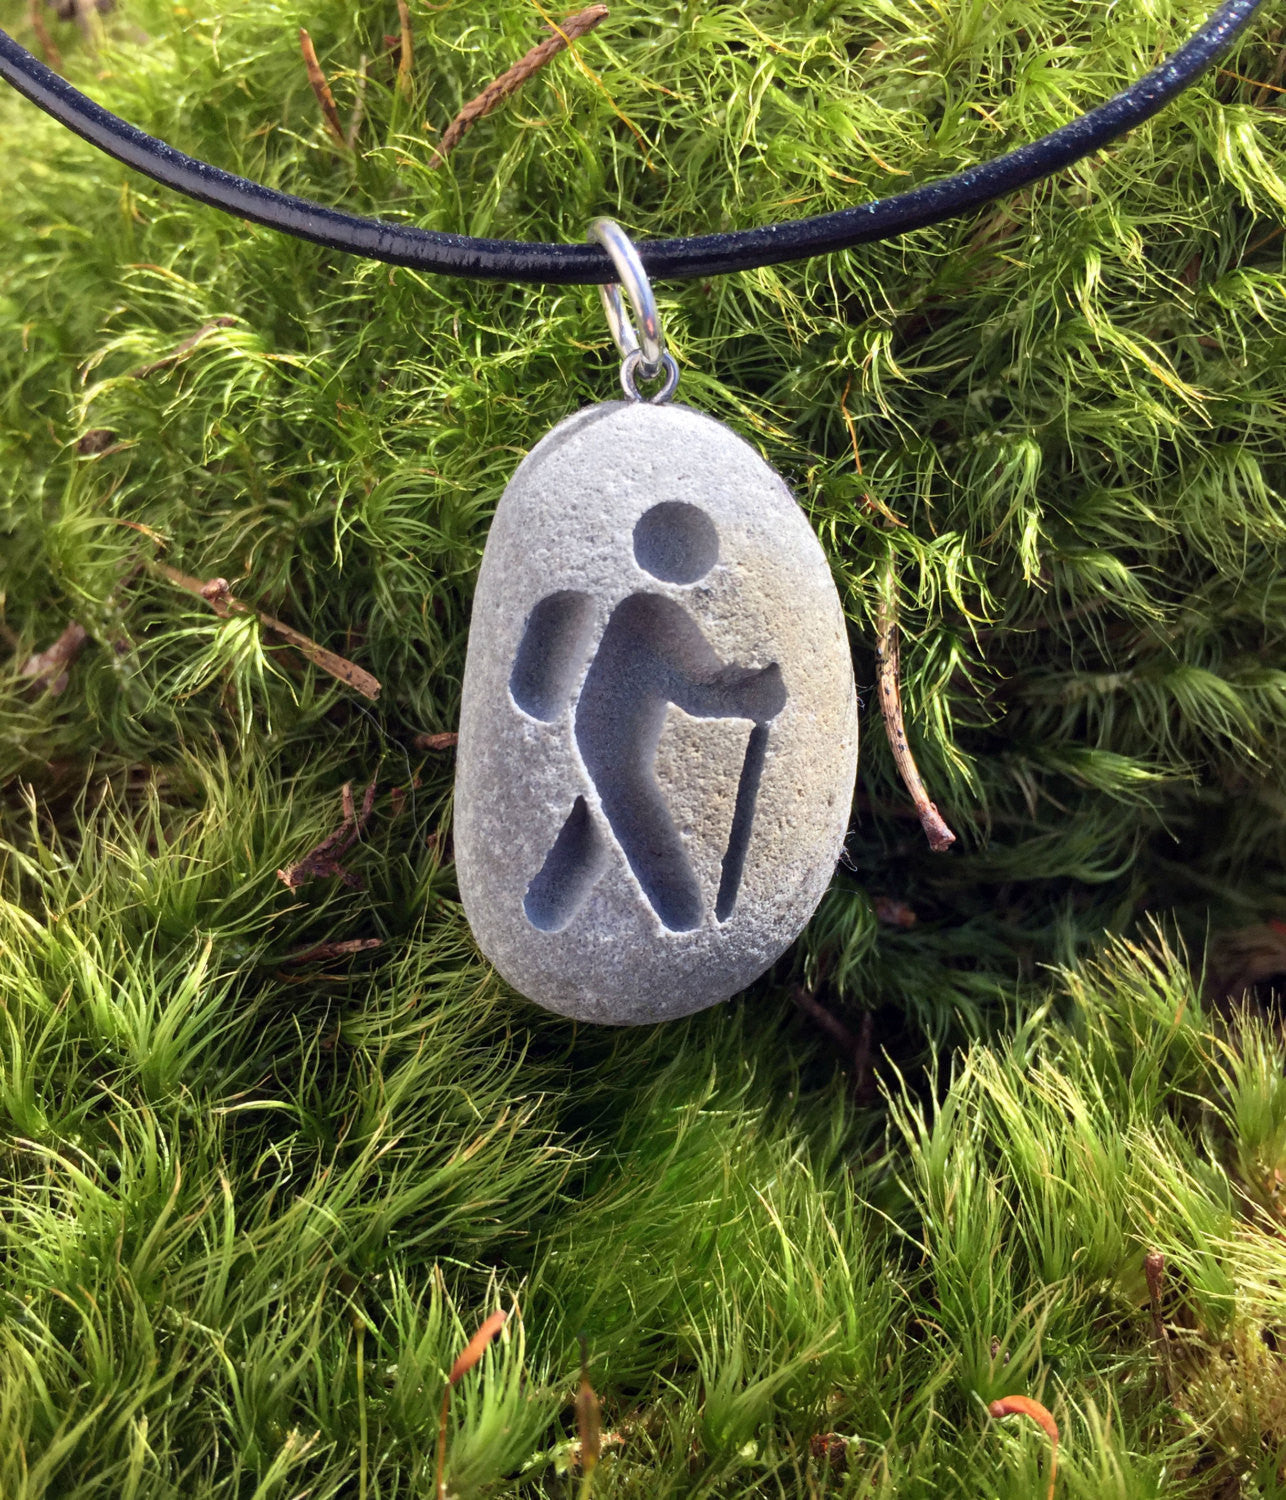 Hiker ahead! Hiking Lover's symbol necklace- Engraved Beach Stone Pendant Jewelry - choose Male or Female! - Cast a Stone